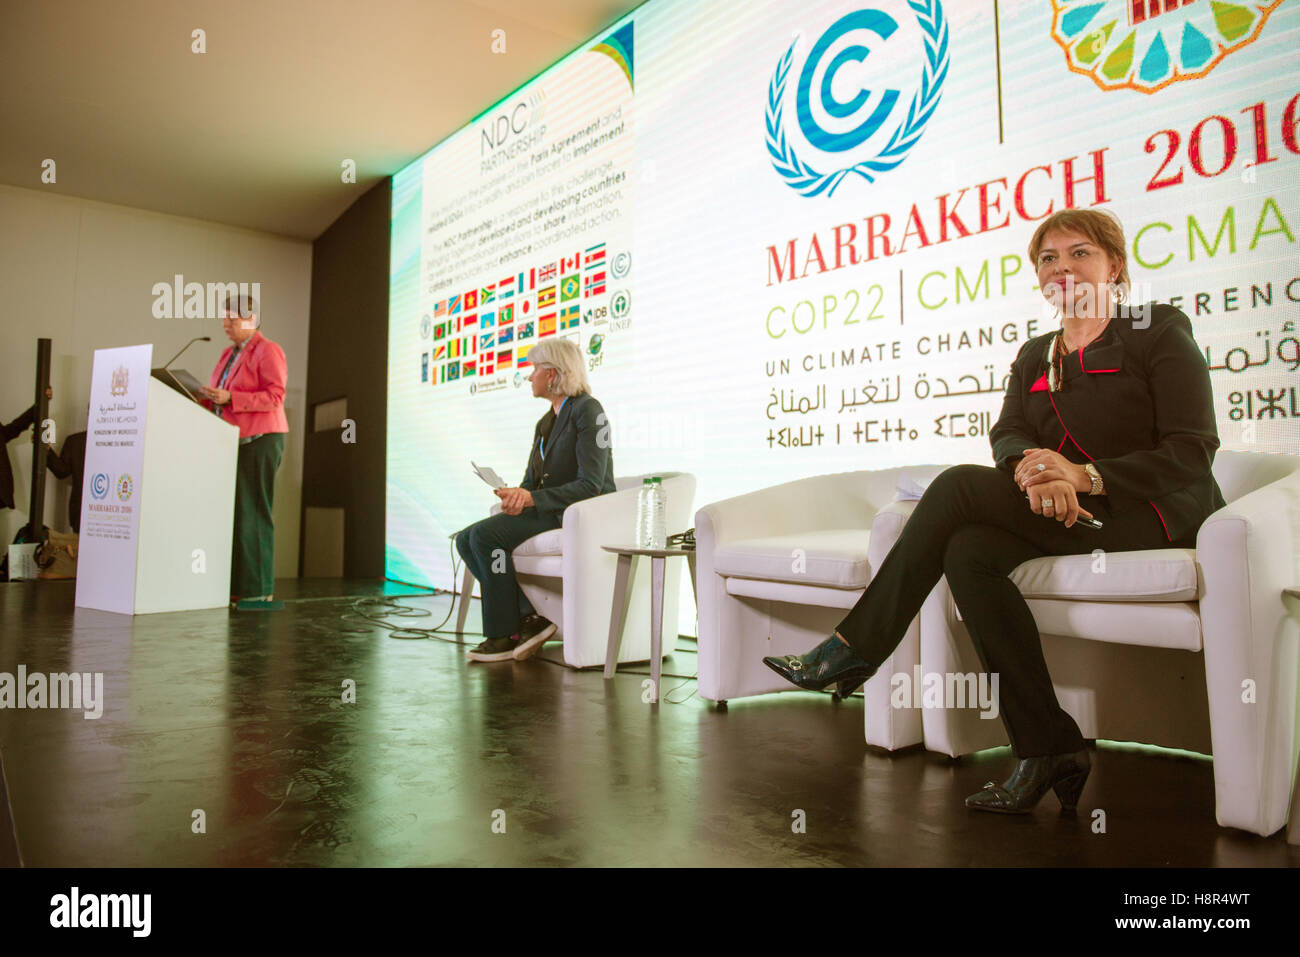 Marrakech, Morocco. 15th Nov, 2016. The German Federal Minister of the Environment Barbara Hendricks, the Moroccan Minister of Environment Hakima El Haite and the French leading negotiator Laurence Tubiana partake in the UN Climate Conference COP22 in Marrakech, Morocco, 15 November 2016. Germany and the host Morocco have introduced a climate protection consultation programme for less experienced nations. Photo: Abdellah Azizi/dpa/Alamy Live News Stock Photo